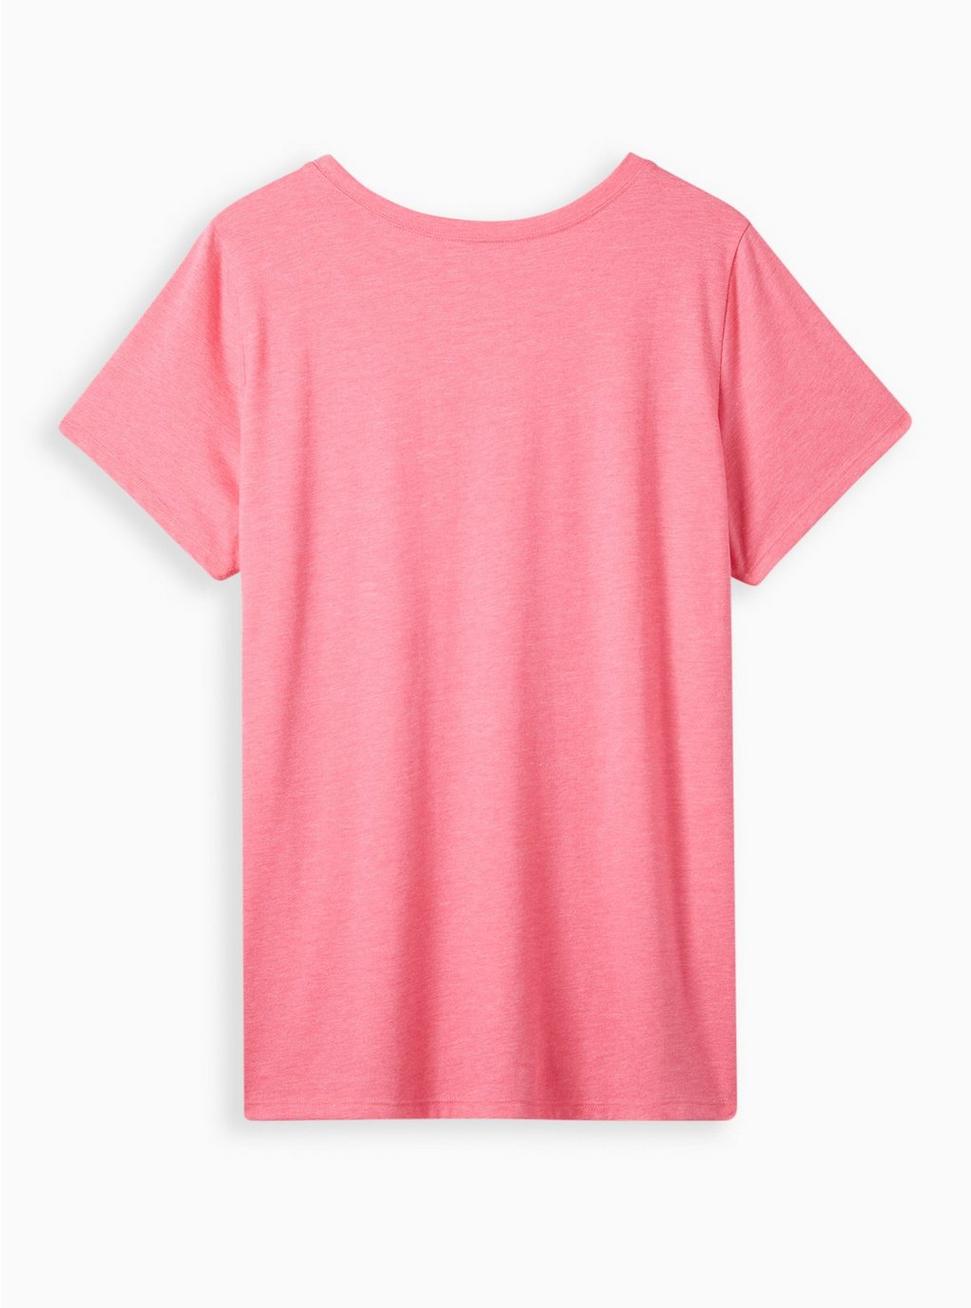 Plus Size - Everyday Tee - Signature Jersey Adult Excessive Pink - Torrid